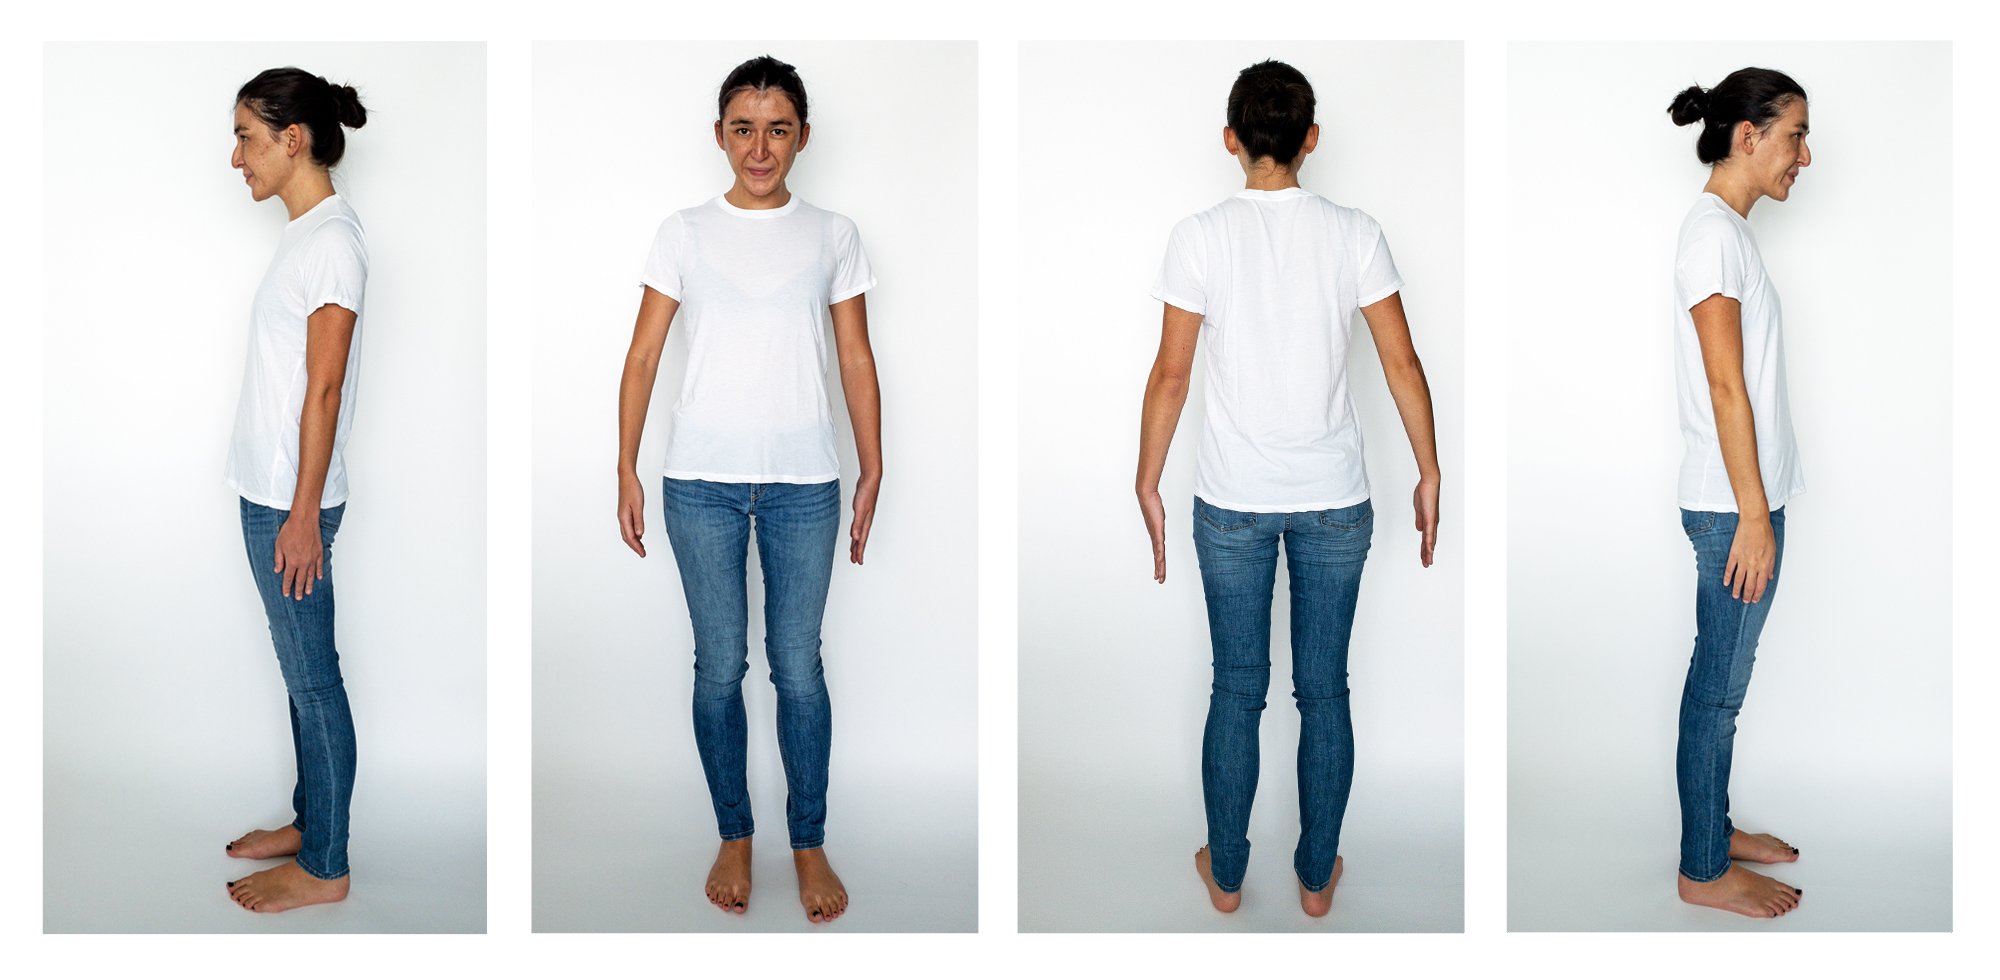 Everlane T-Shirt Review: Each style is hit or miss TBH